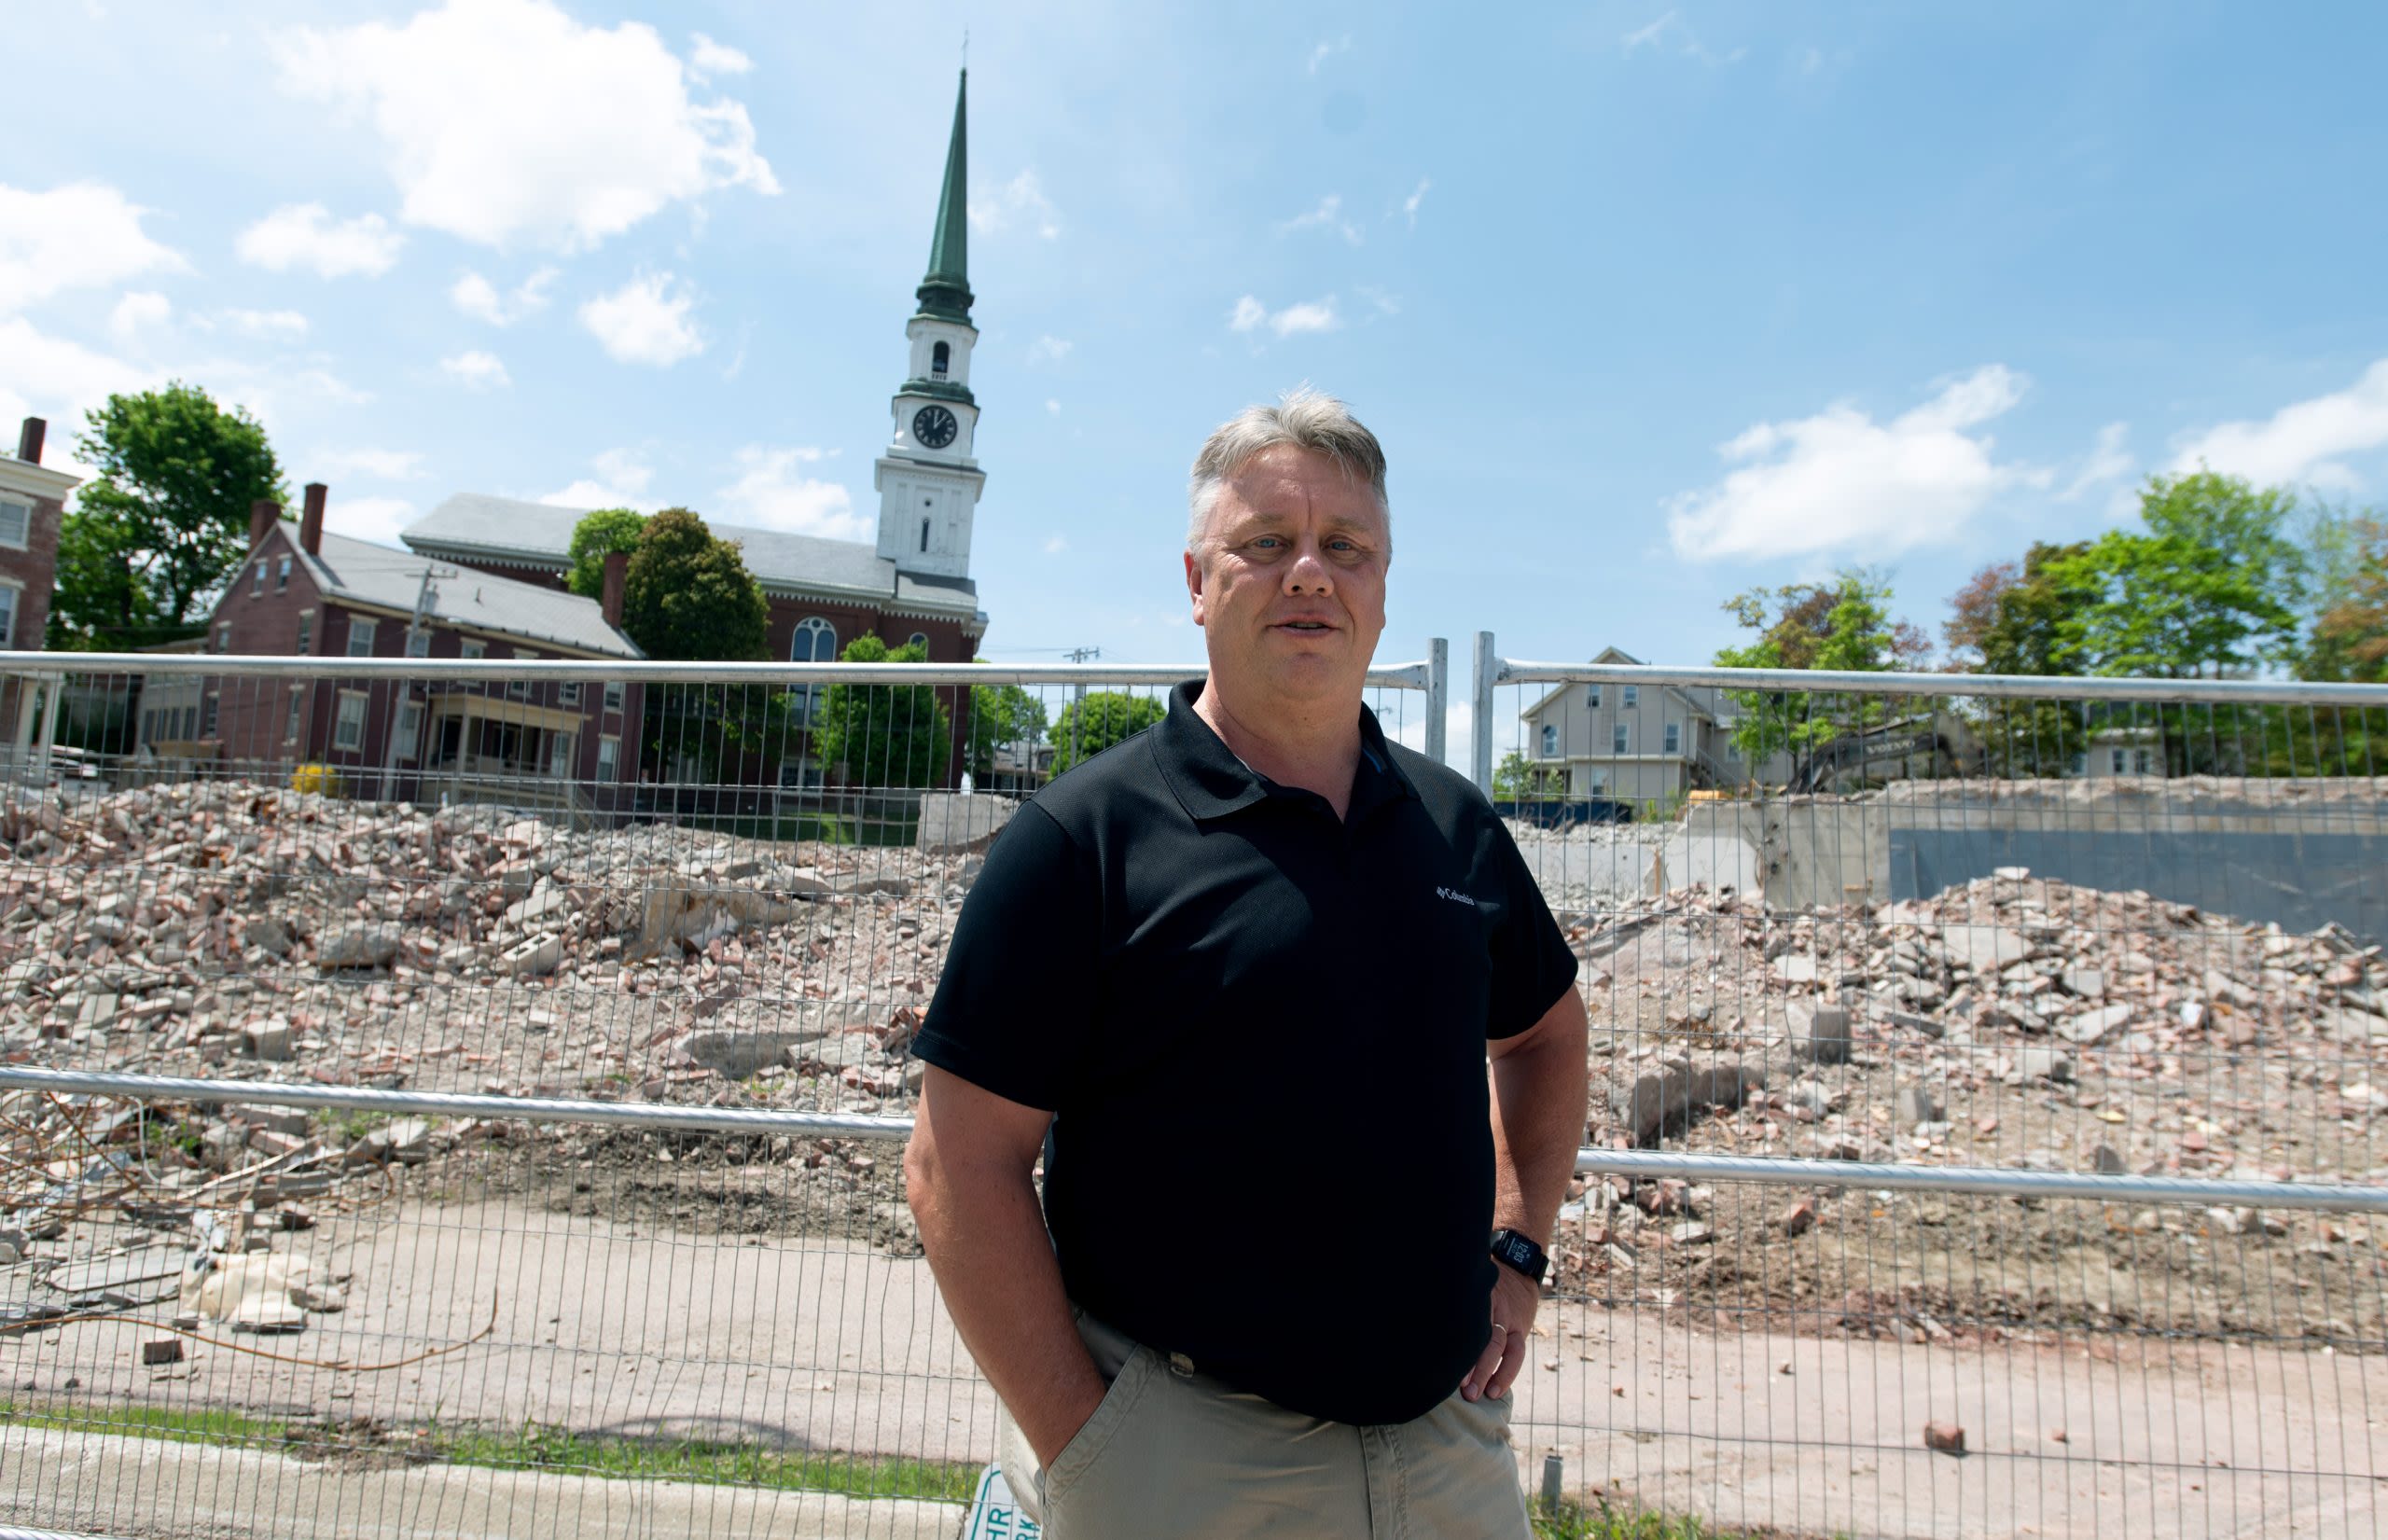 Piles of rubble remain months after demolition of old Bangor YMCA began